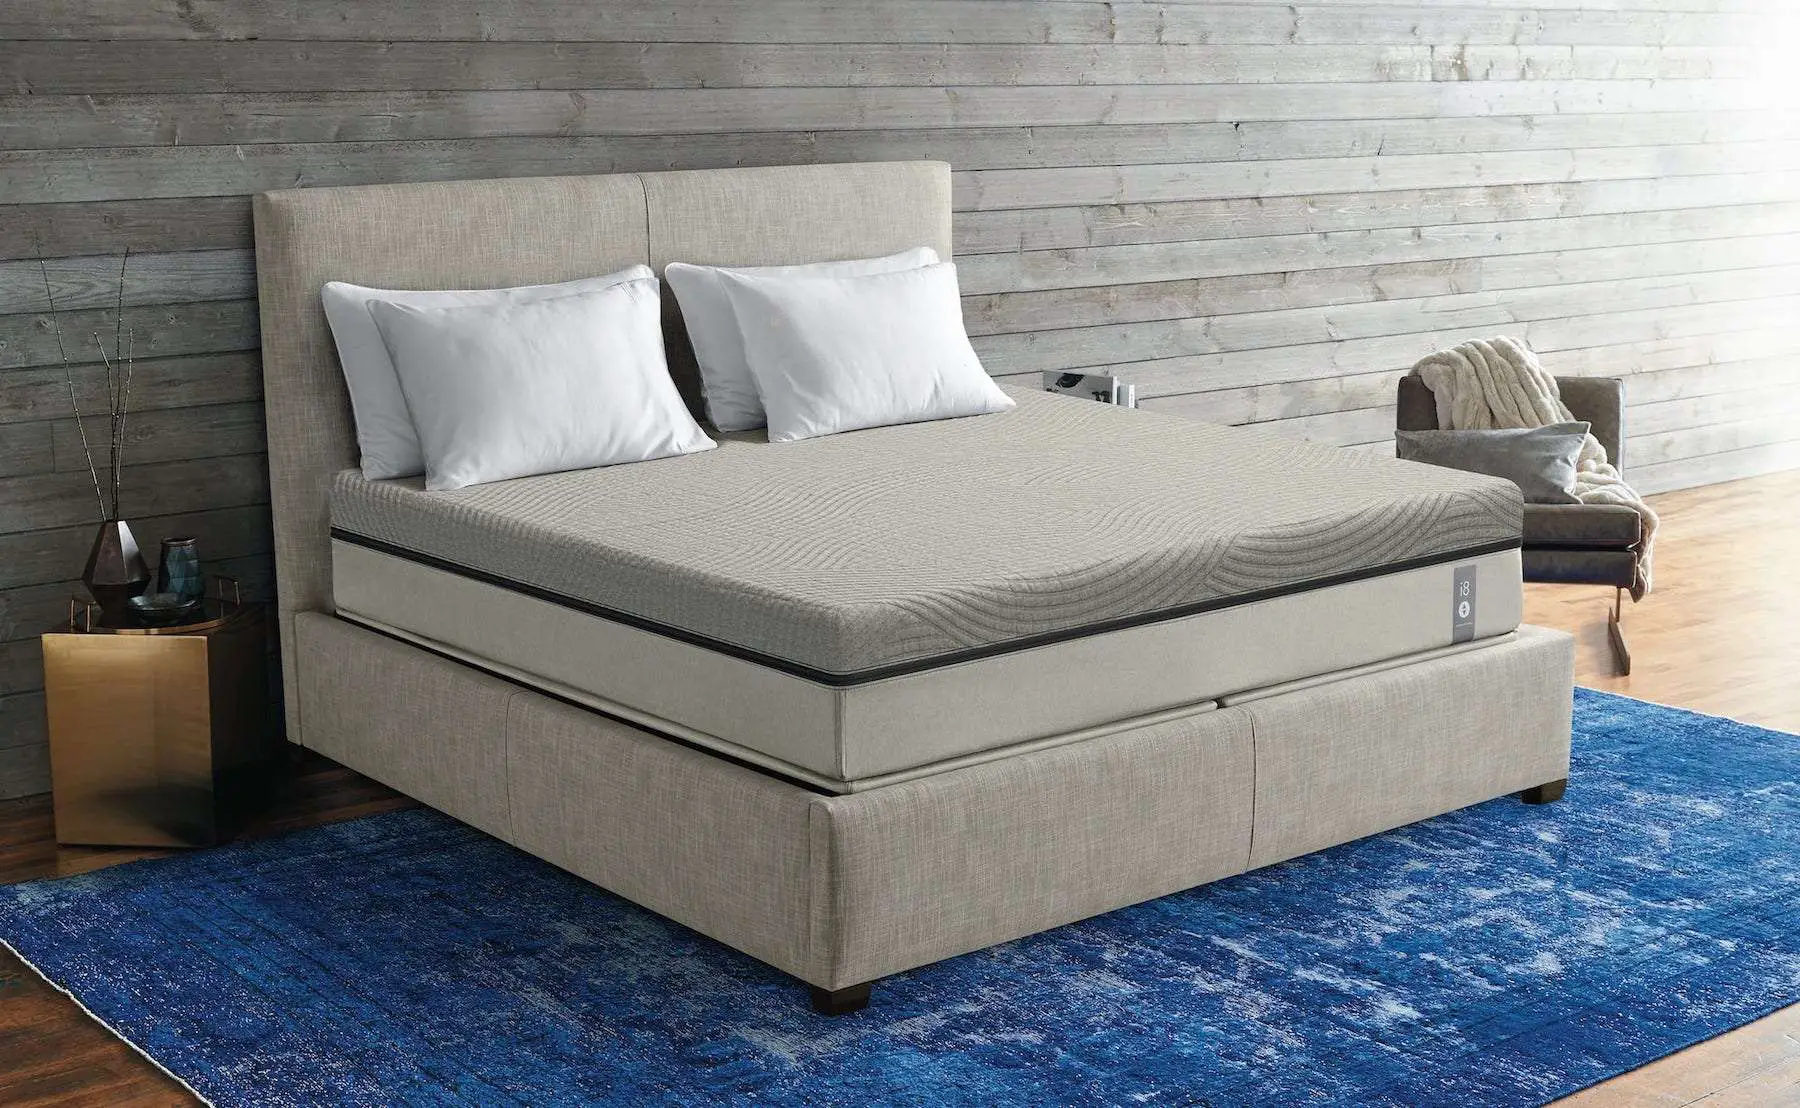 The Sleep Number 360 Smart Bed Cools You Down